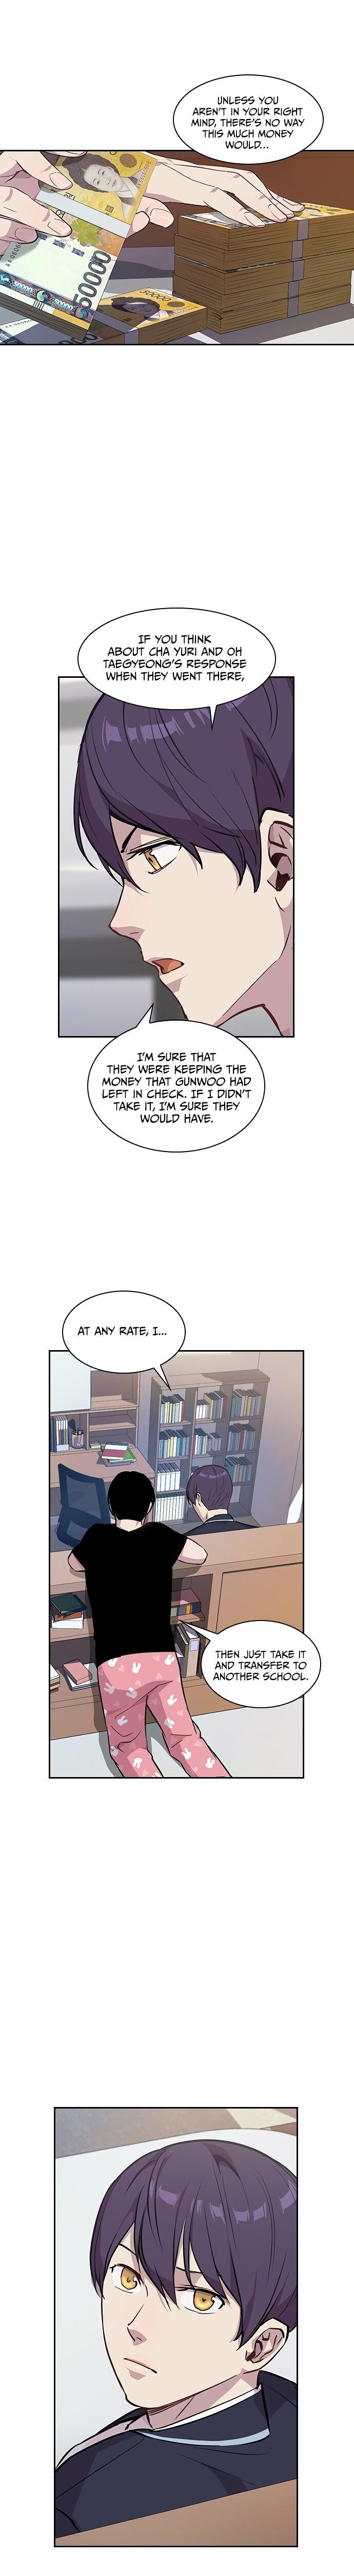 The World Is Money and Power - Chapter 37 Page 4